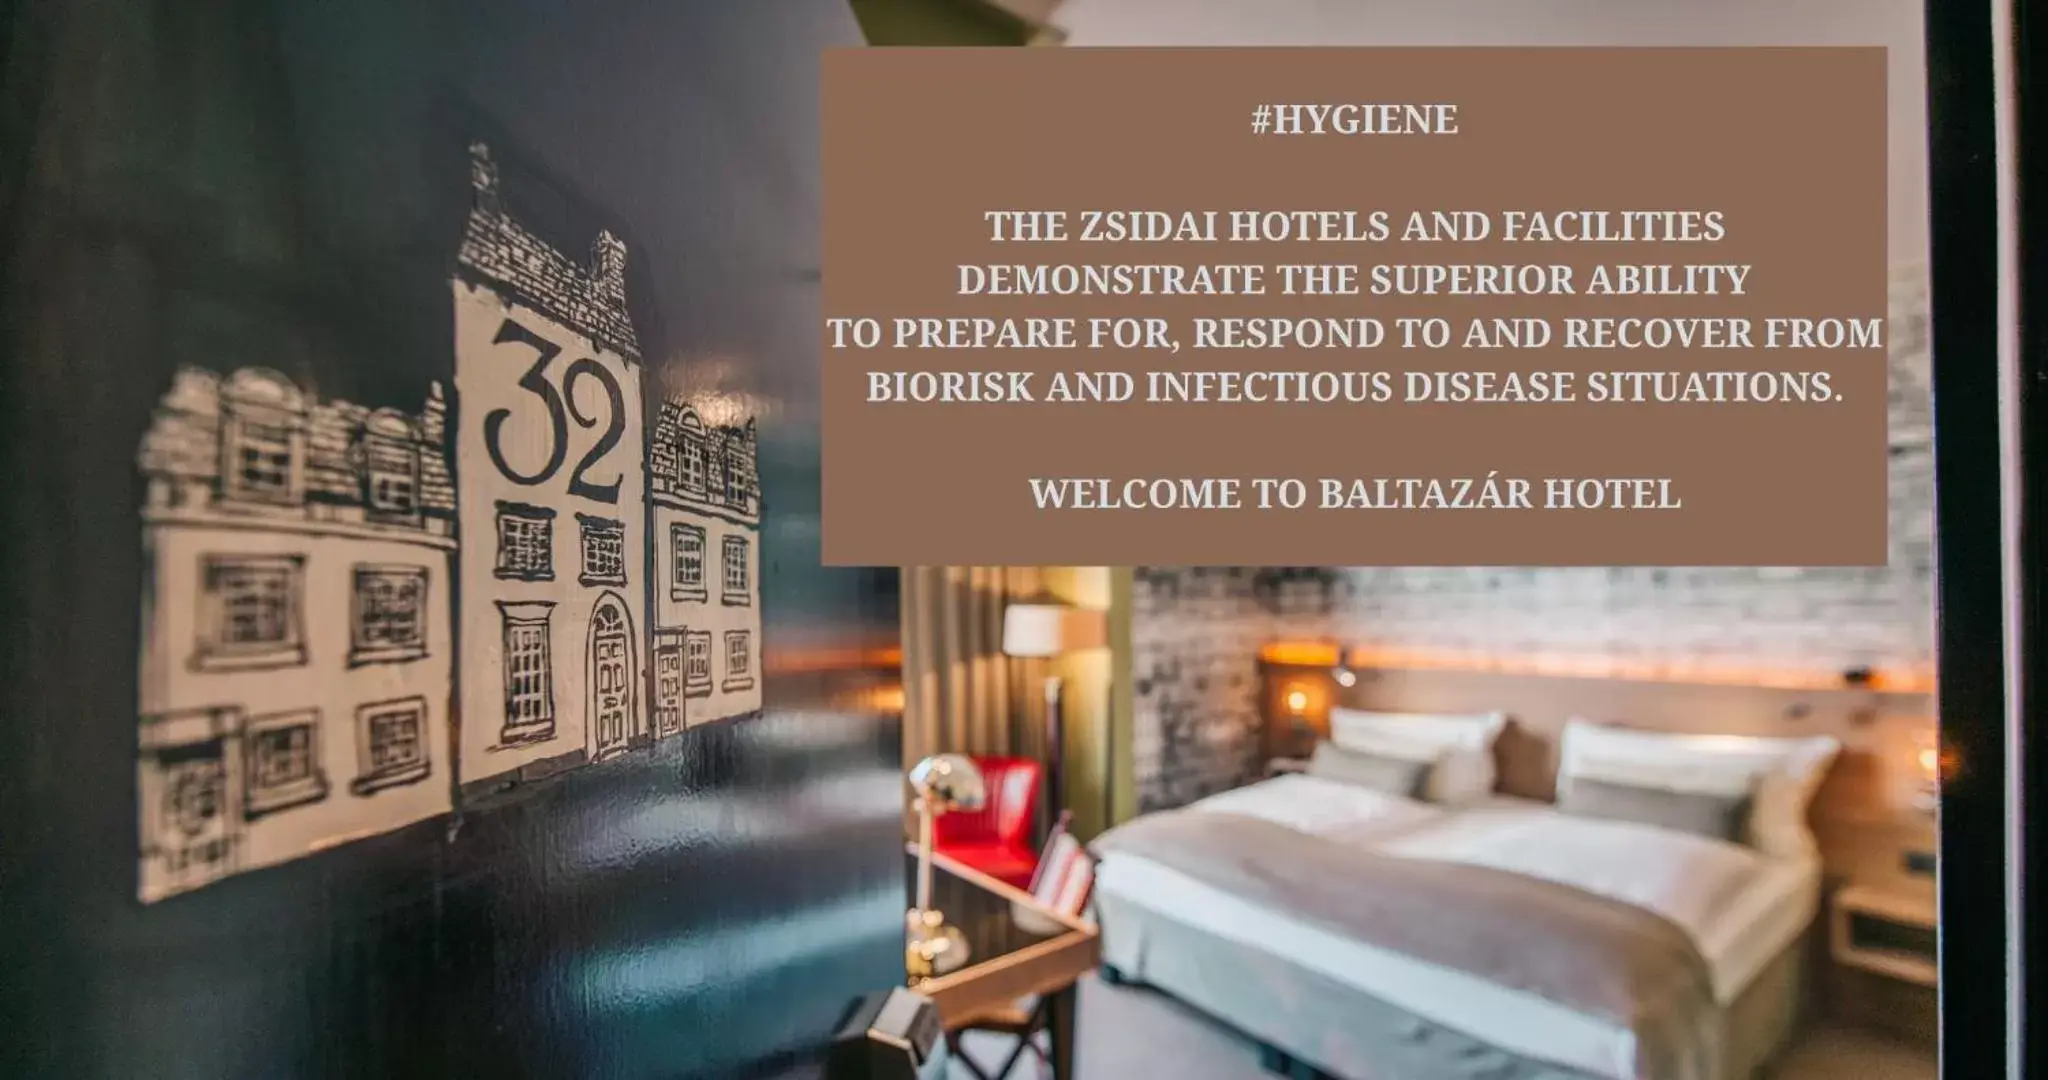 Certificate/Award in BALTAZÁR Boutique Hotel by Zsidai Hotels at Buda Castle